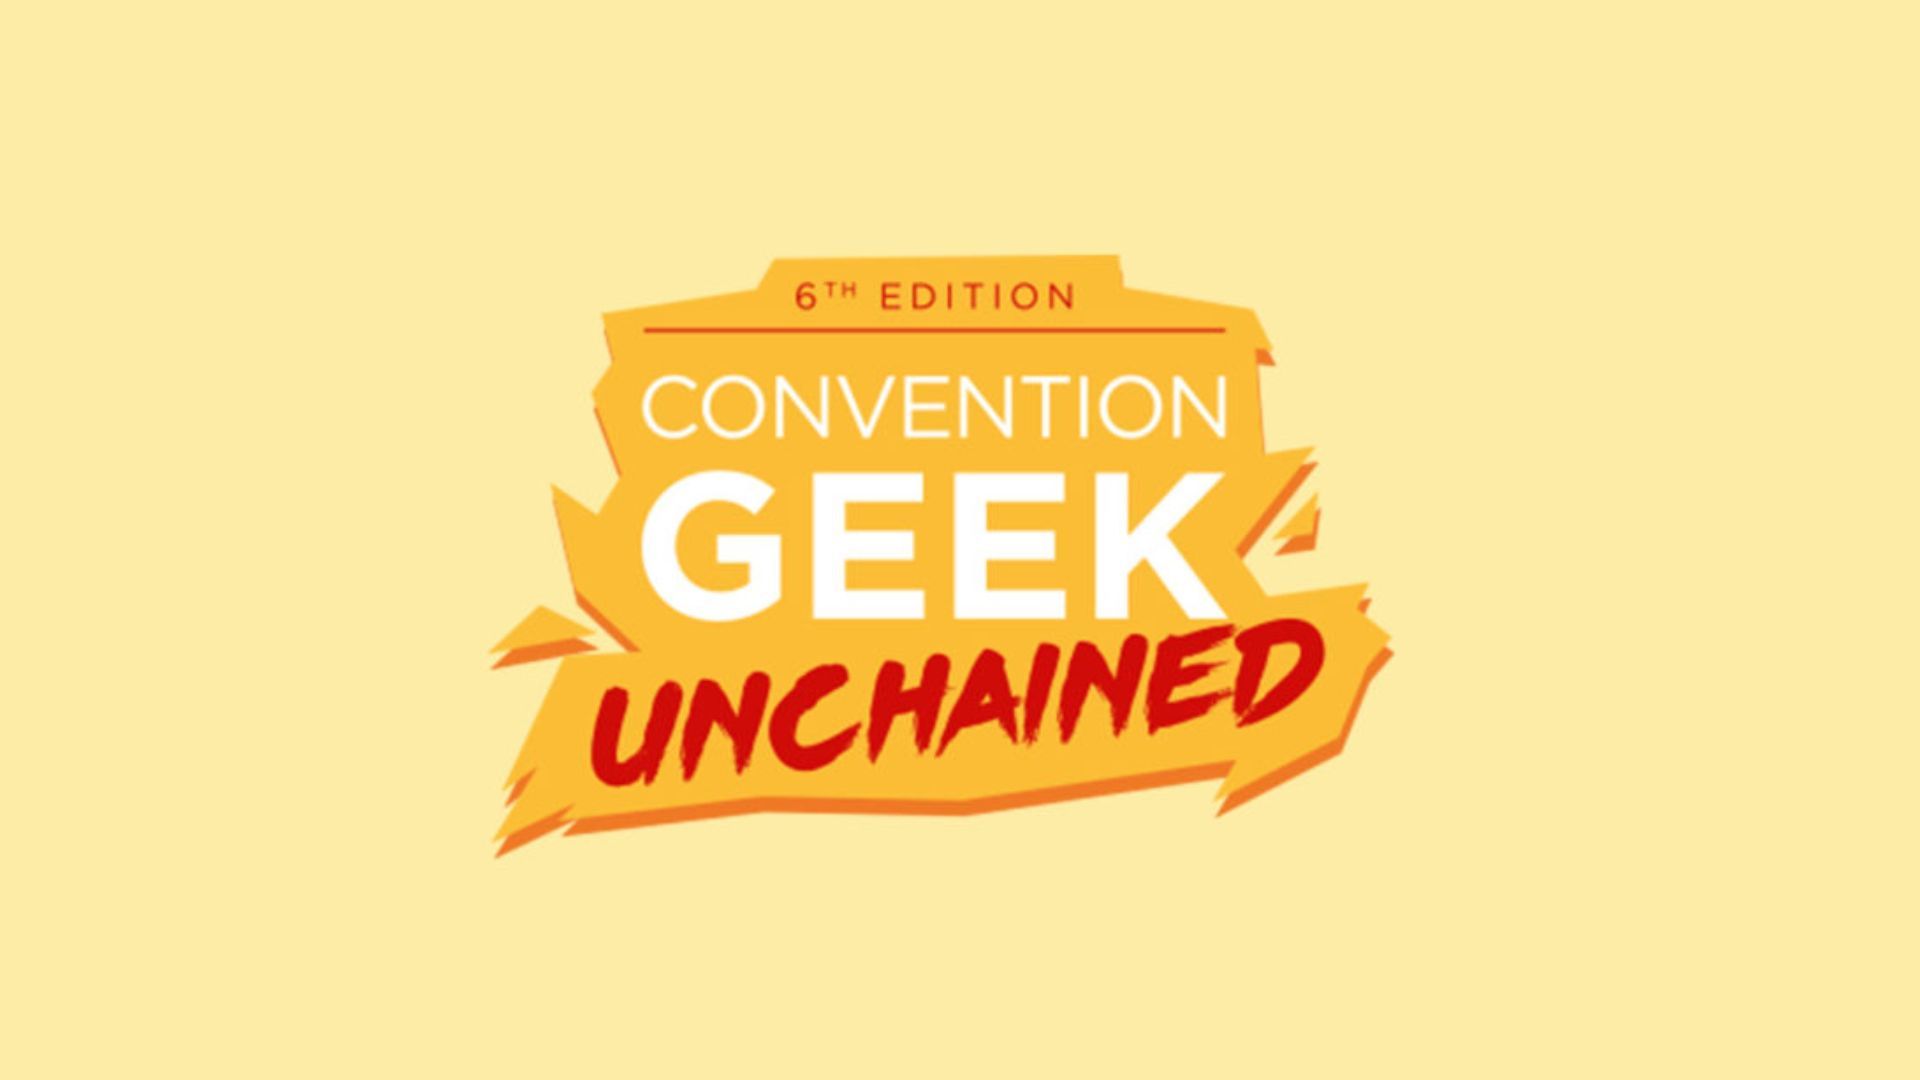 Convention Geek Unchained à Mulhouse